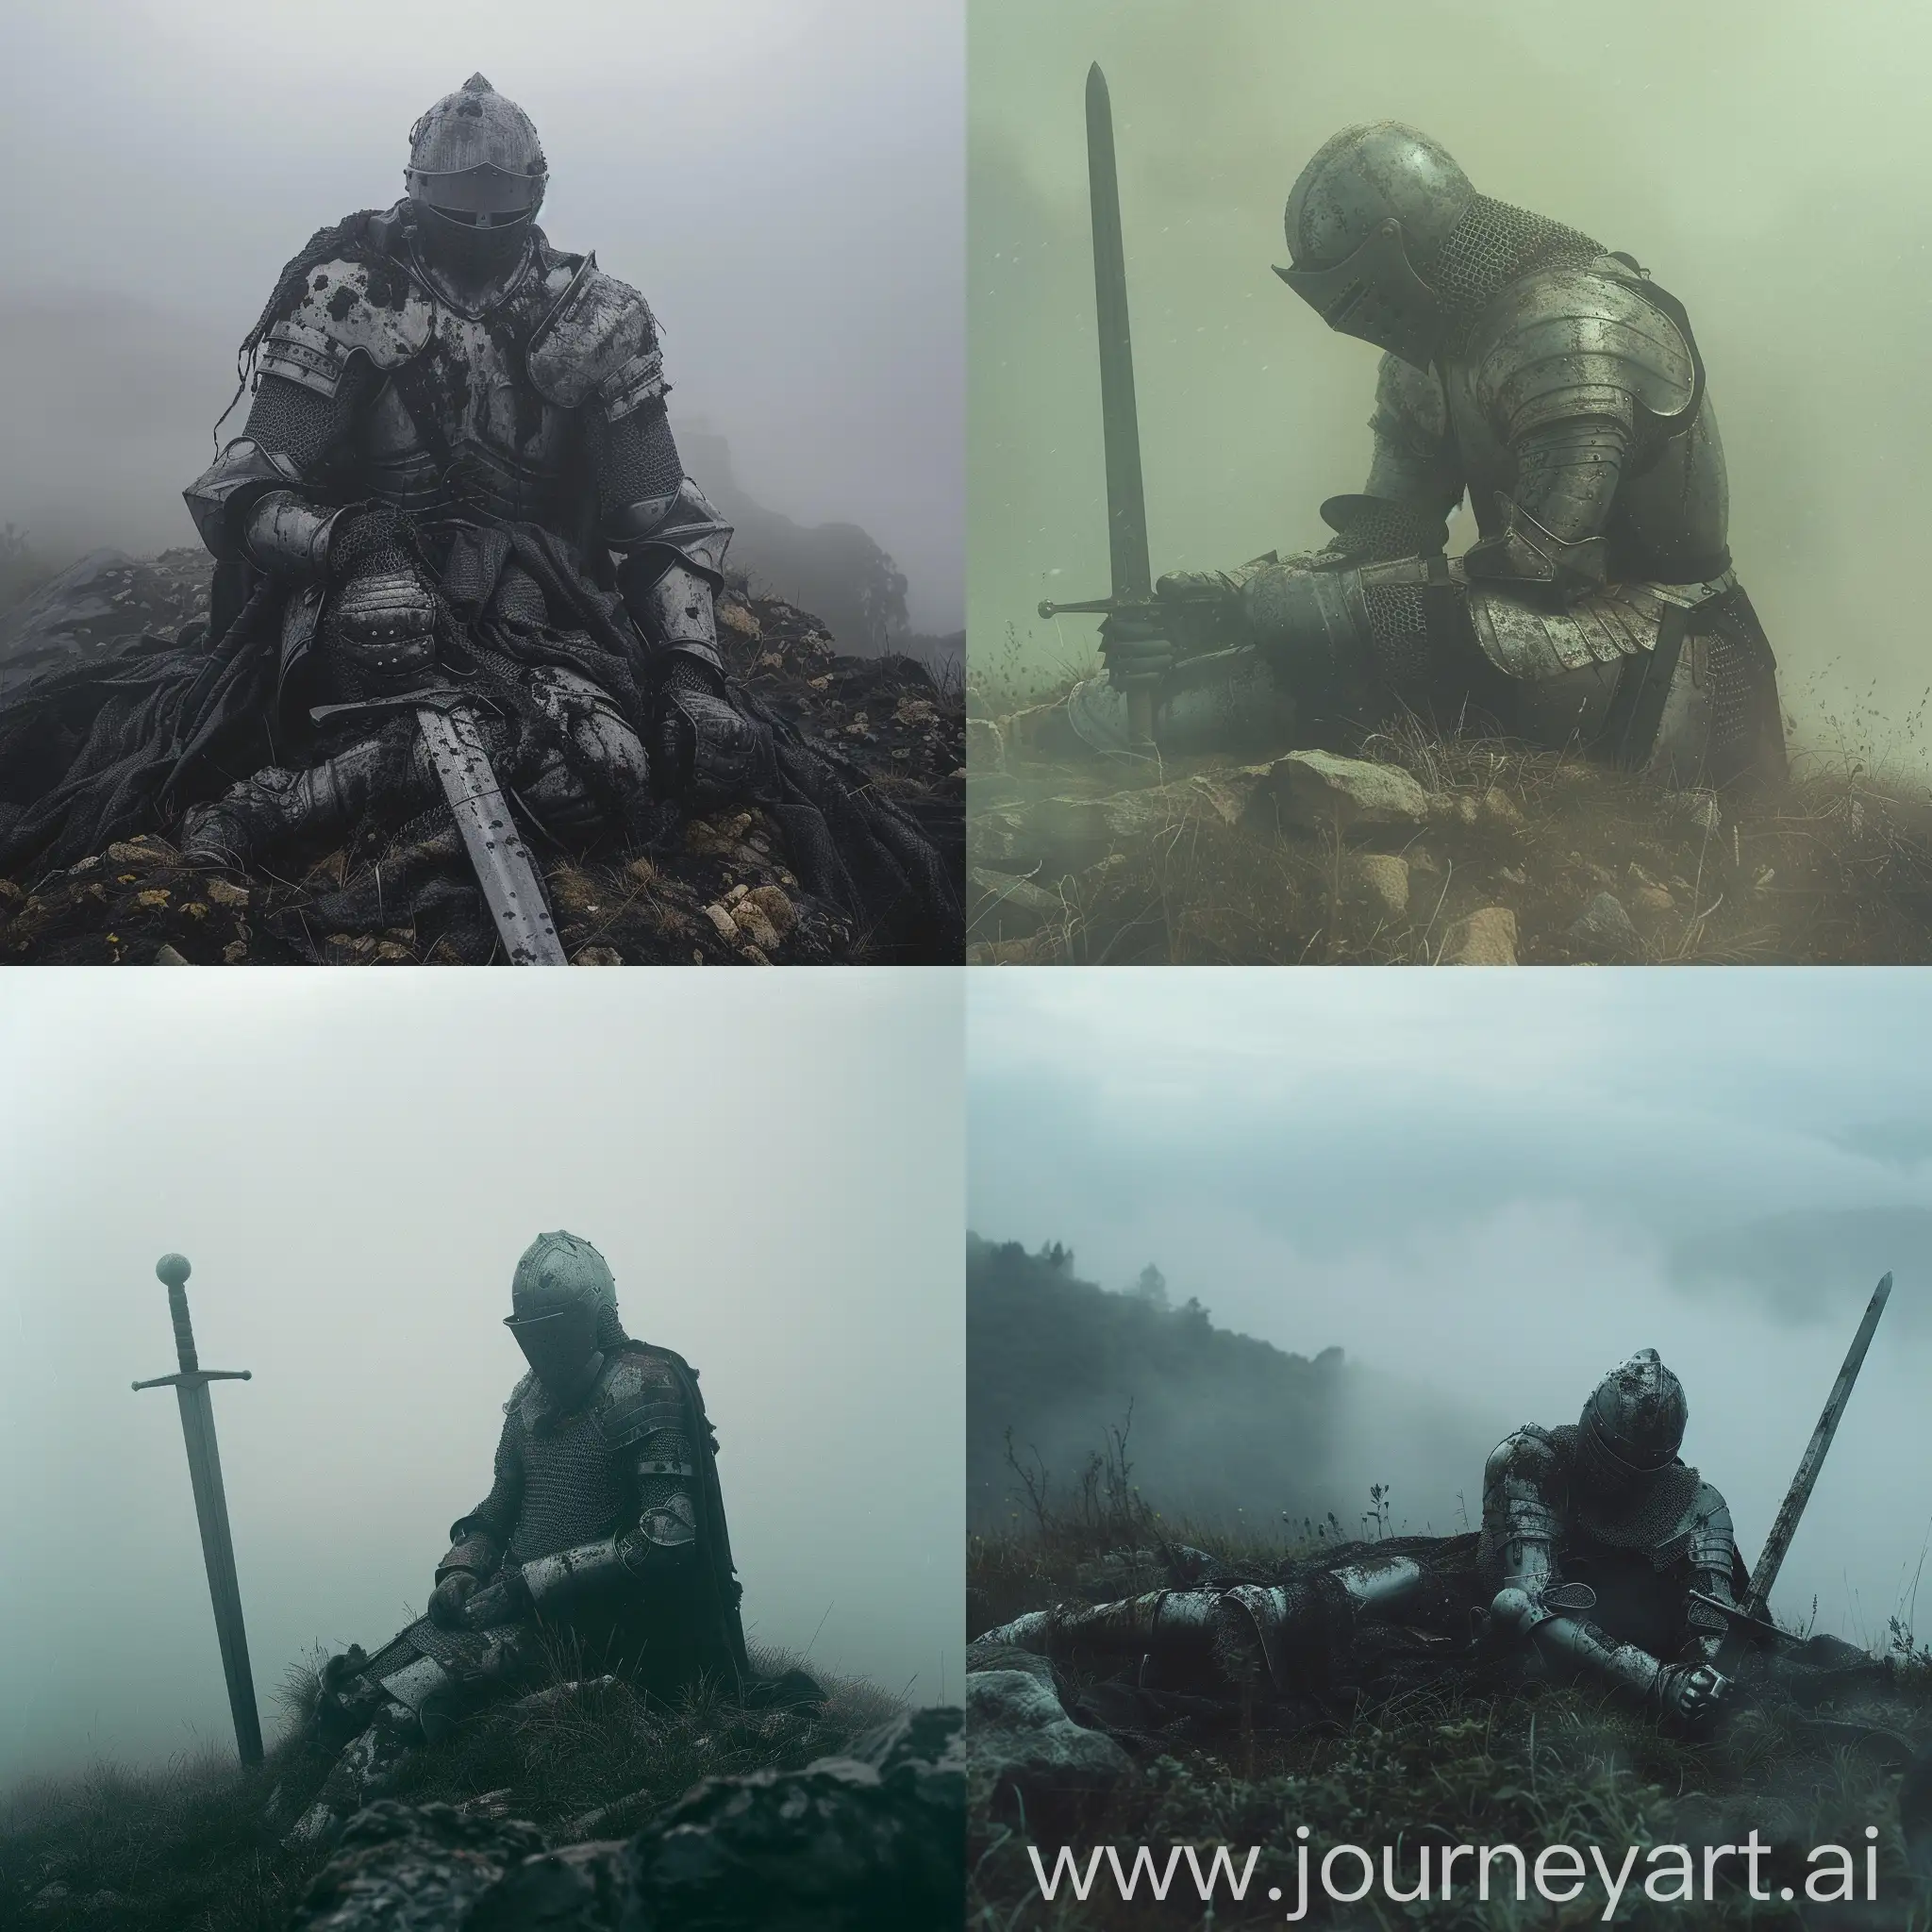 A helmeted knight in greasy armor with a sword lies on a hill shrouded in fog in the style of 80x movies